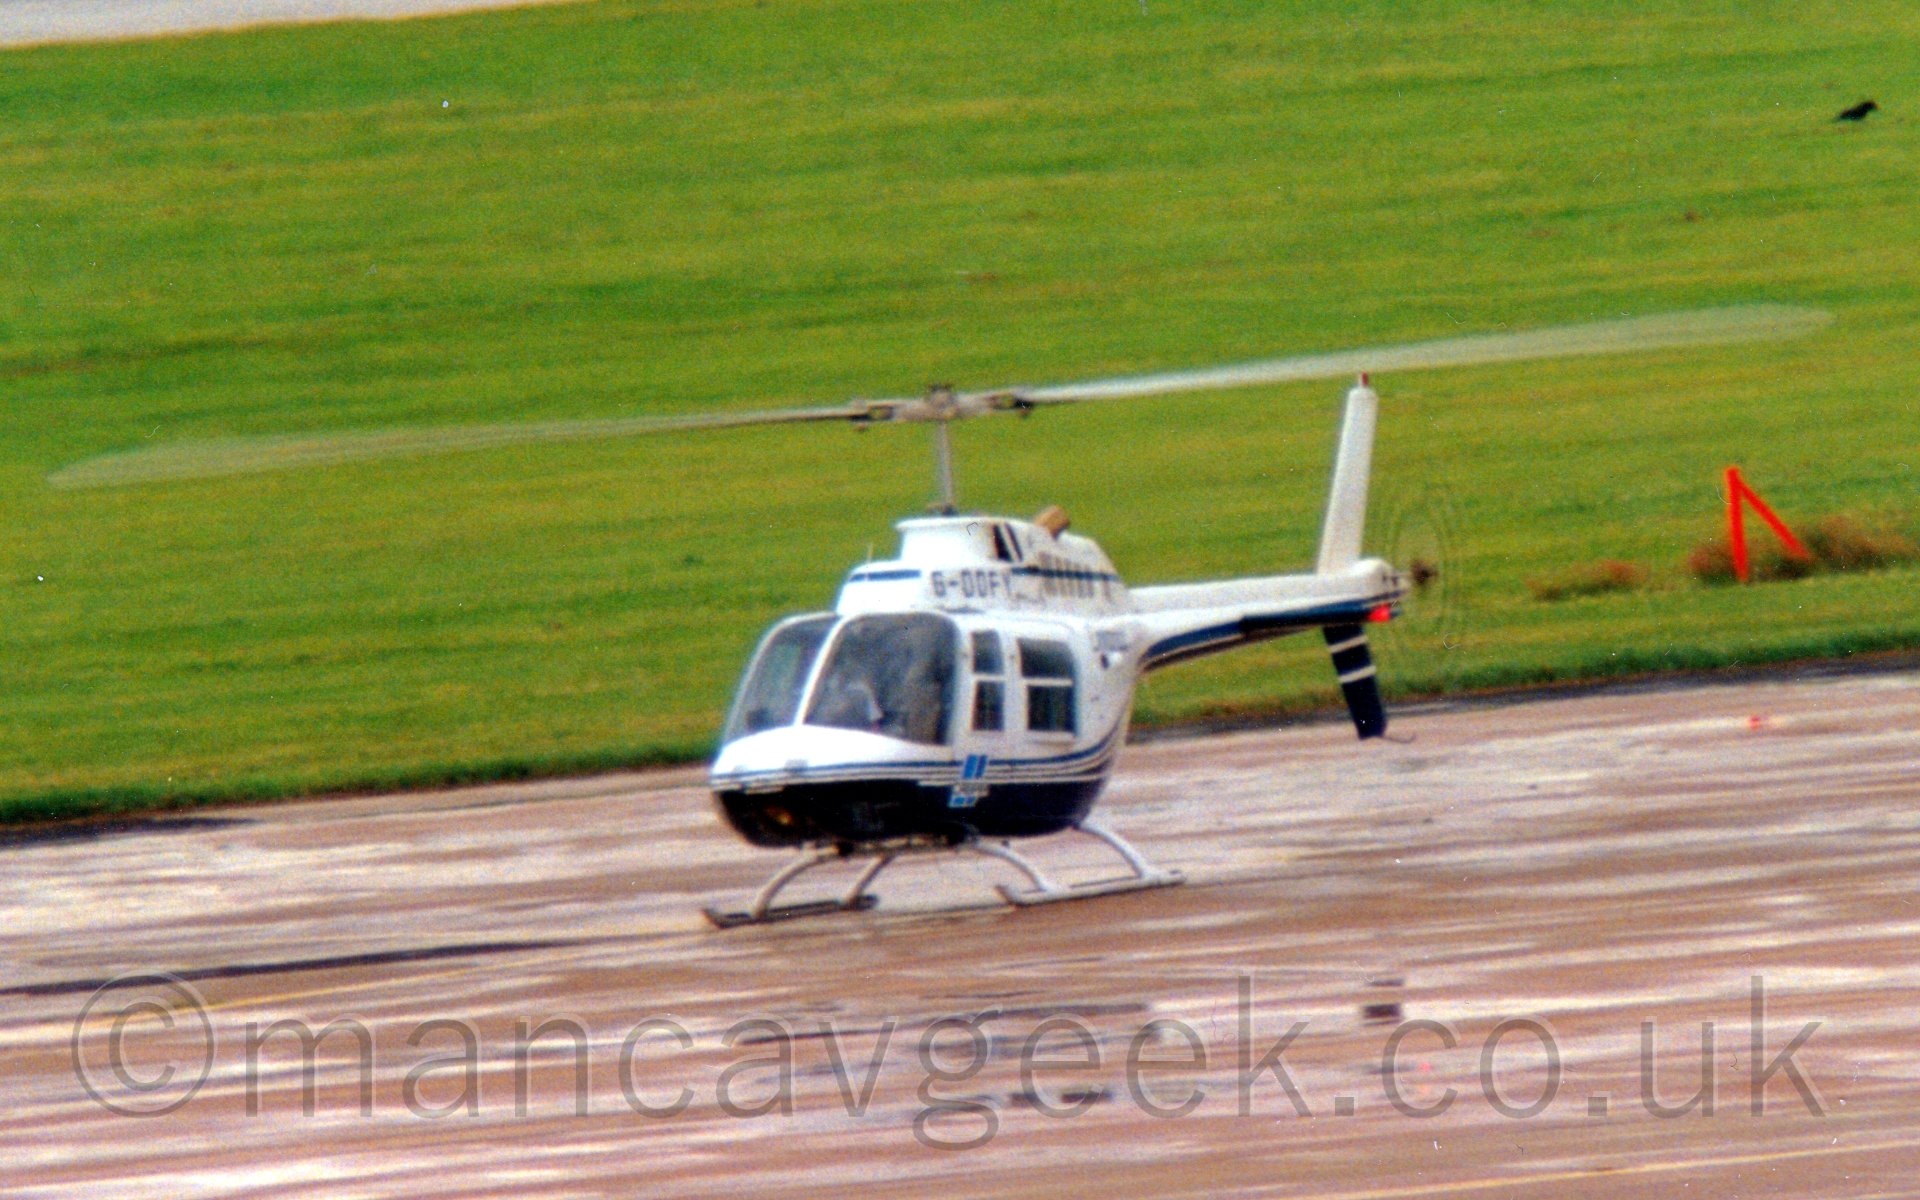 Side view of a helicopter on the ground with both it's main and tail rotors turning. The body is mostly white, with dark blue lower surfaces, the 2 sections seperated by thin light blue and brown stripes running all the way from the nose to the tail. In the background, the apron the helicopter is parked on gives way to a large expanse of green grass which fills the frame.